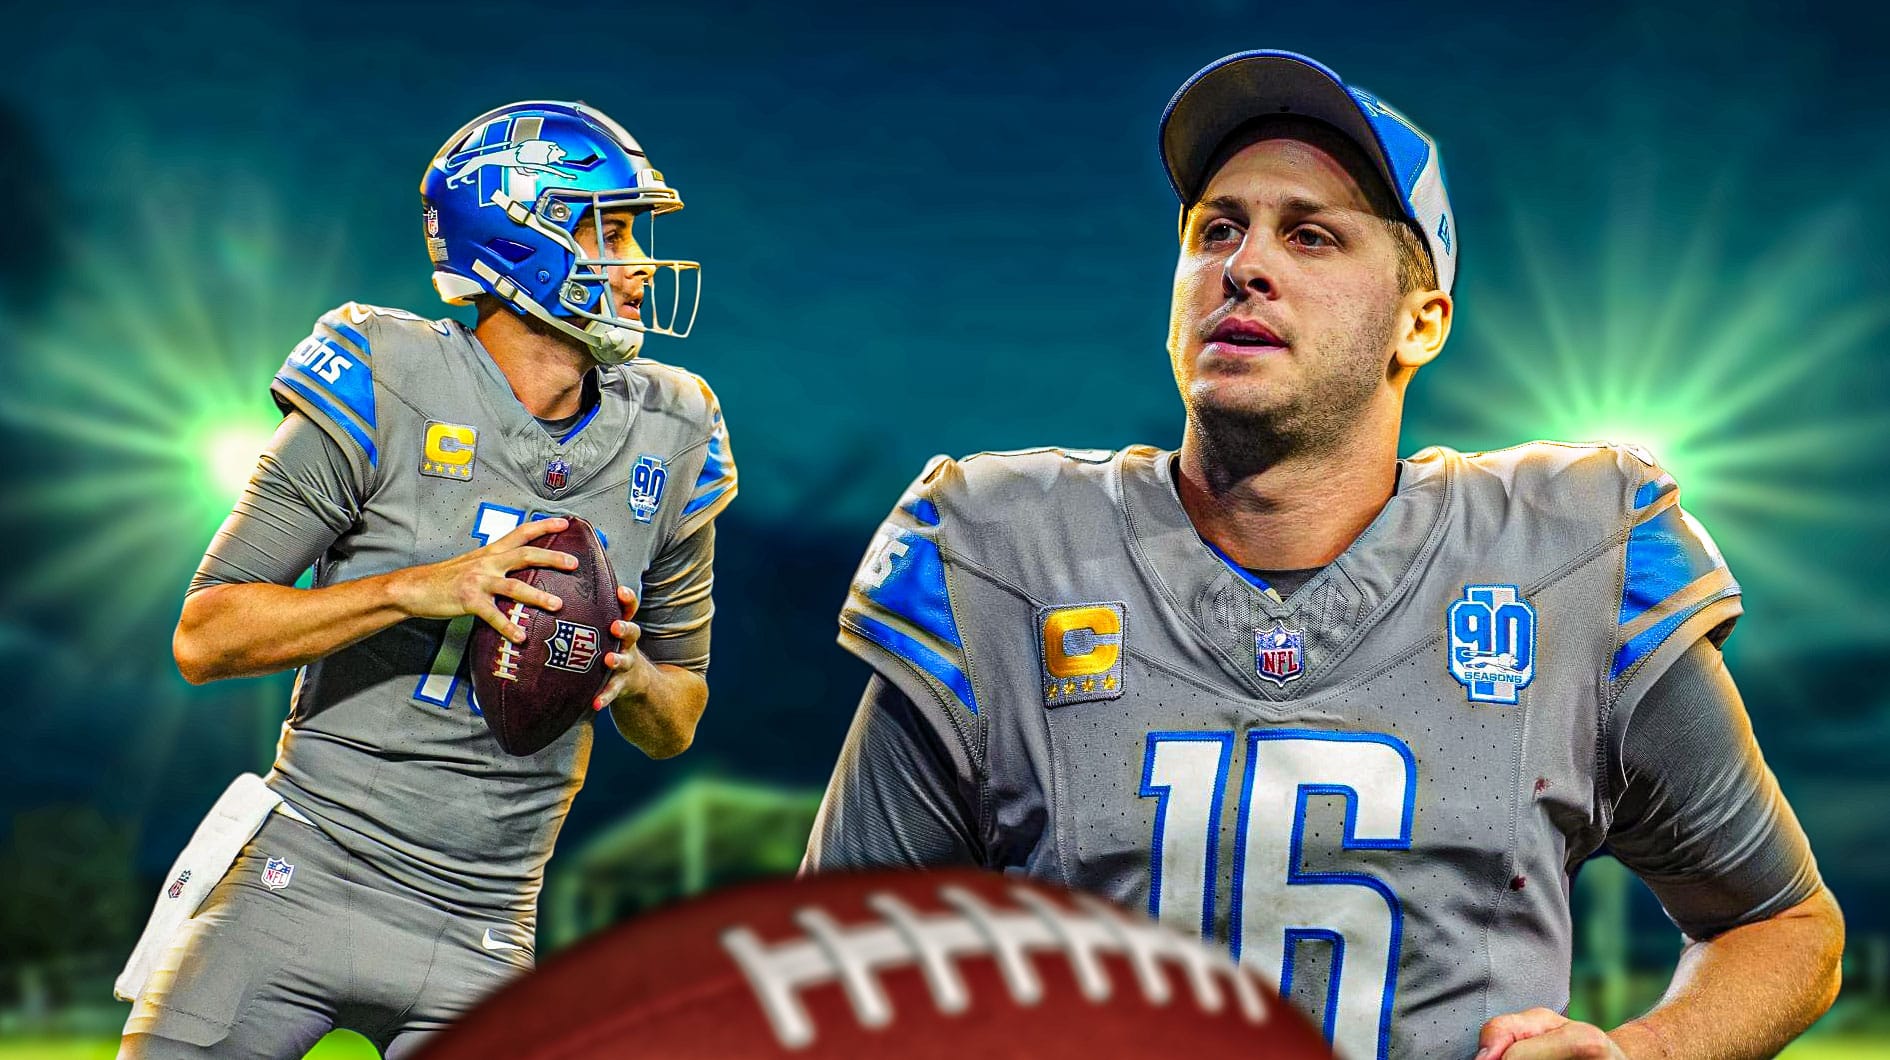 Detroit, Lions, Jared Goff, NFC North, Chargers, Jared Goff with Lions field in the background